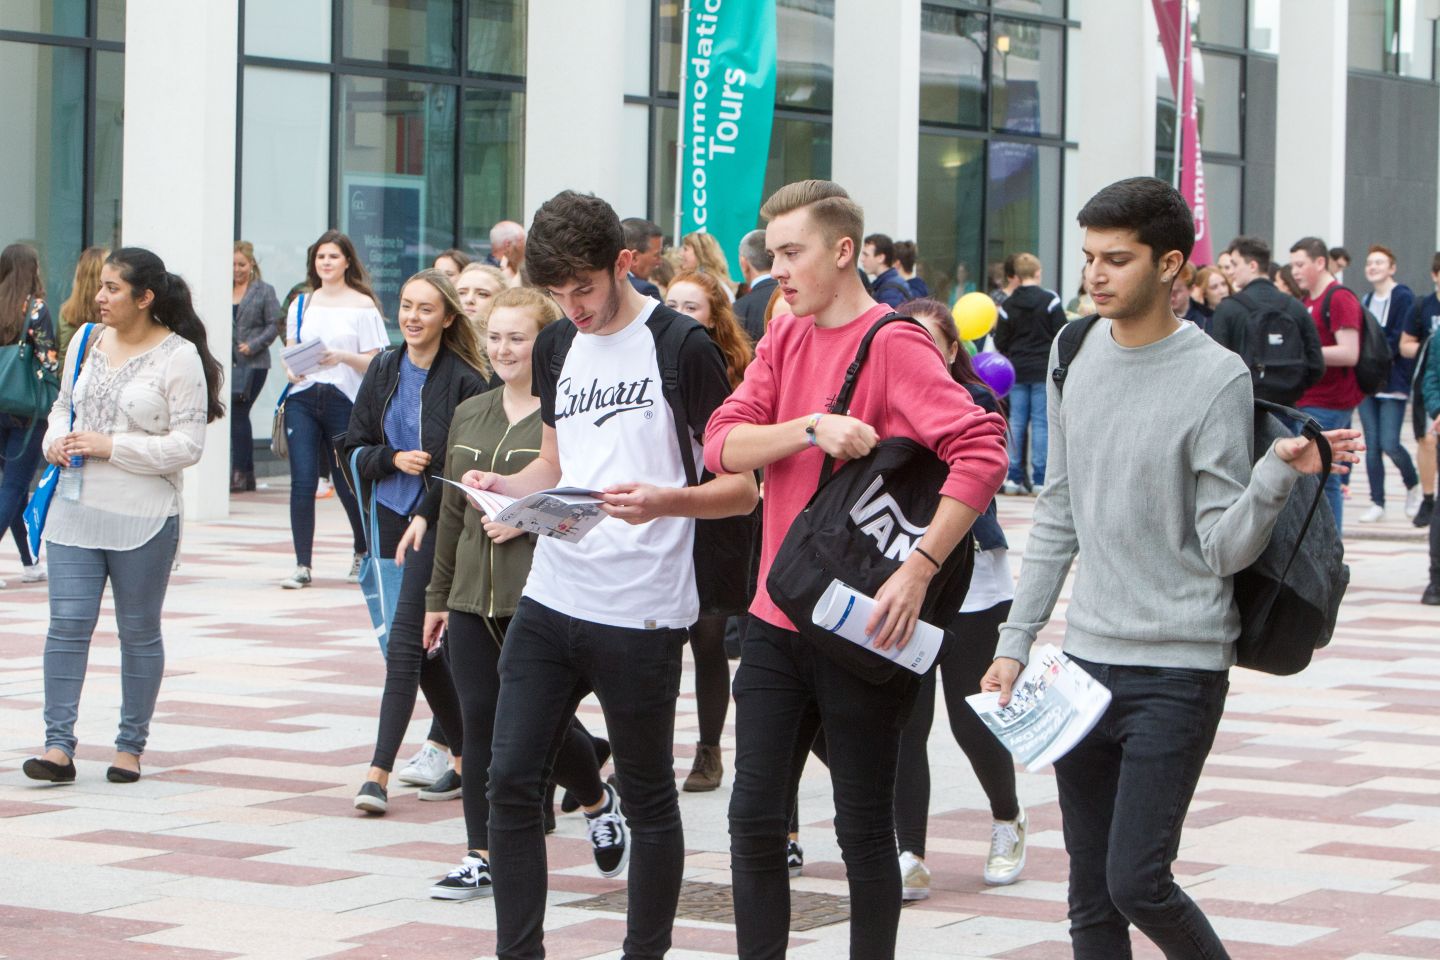 Group of students at Open Day at Glasgow Caledonian University